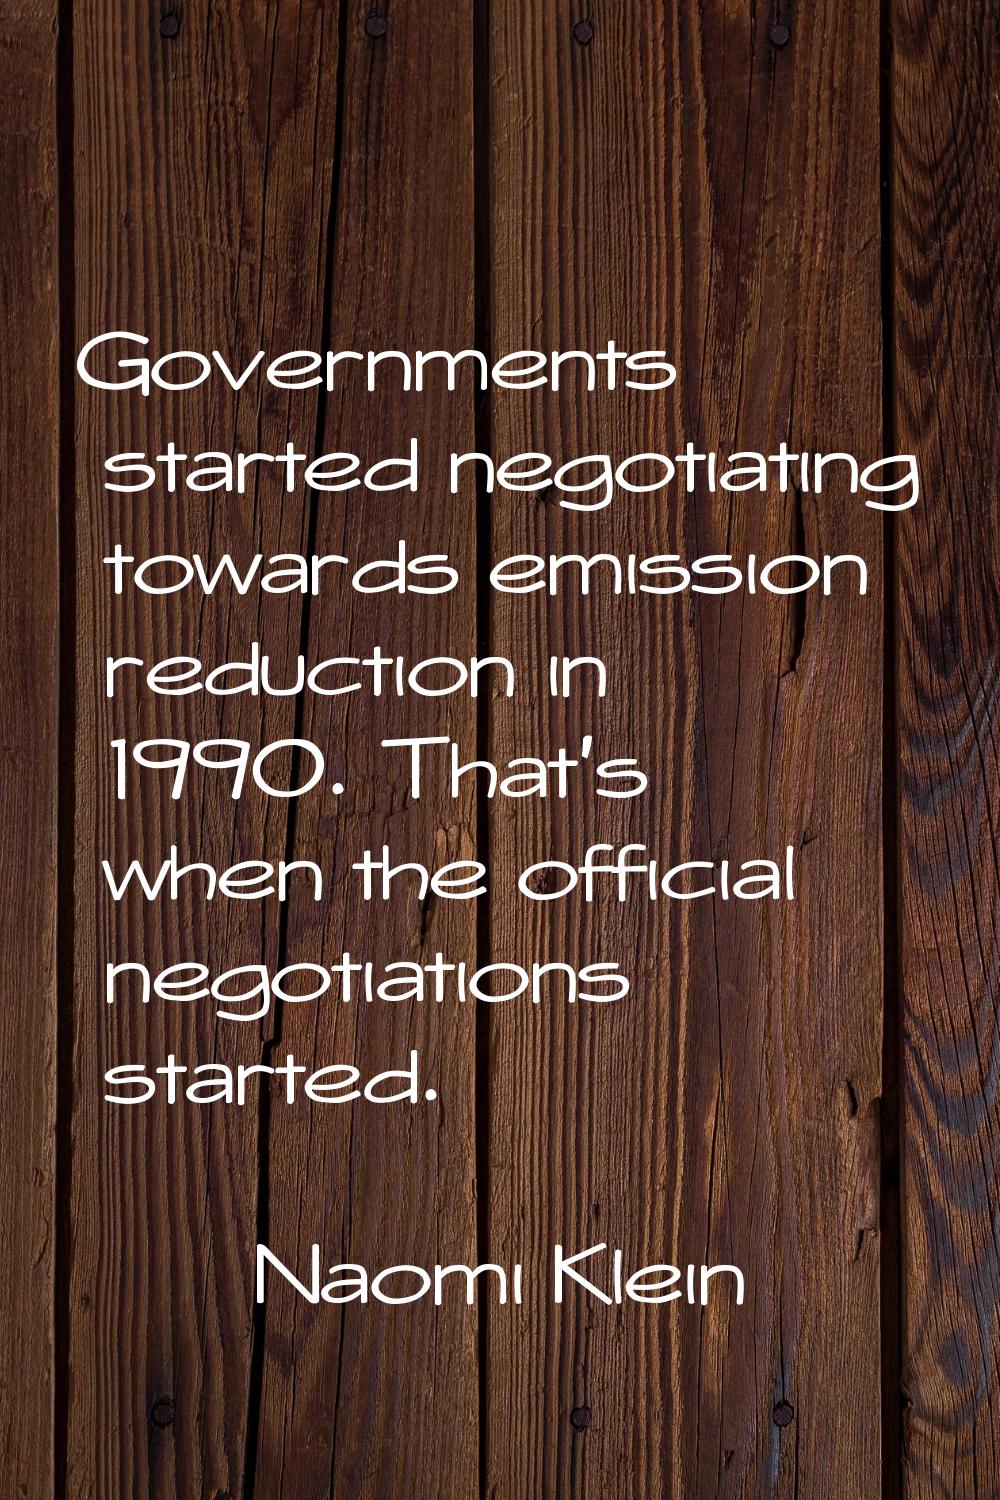 Governments started negotiating towards emission reduction in 1990. That's when the official negoti